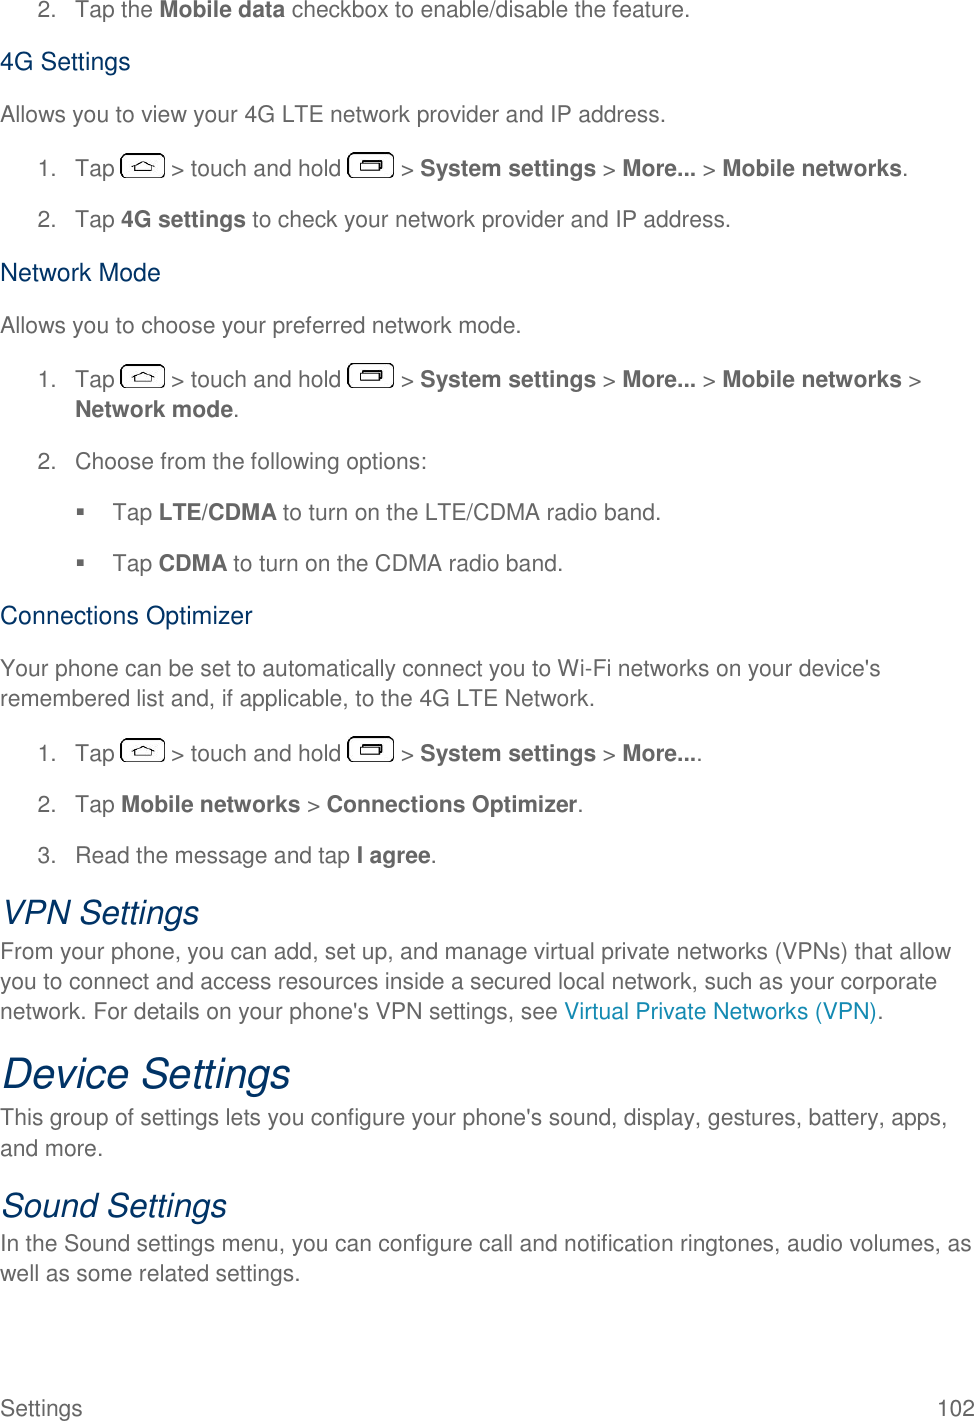  Settings  102 2.  Tap the Mobile data checkbox to enable/disable the feature. 4G Settings Allows you to view your 4G LTE network provider and IP address. 1.  Tap   &gt; touch and hold   &gt; System settings &gt; More... &gt; Mobile networks. 2. Tap 4G settings to check your network provider and IP address. Network Mode Allows you to choose your preferred network mode. 1.  Tap   &gt; touch and hold   &gt; System settings &gt; More... &gt; Mobile networks &gt; Network mode. 2.  Choose from the following options:   Tap LTE/CDMA to turn on the LTE/CDMA radio band.   Tap CDMA to turn on the CDMA radio band. Connections Optimizer Your phone can be set to automatically connect you to Wi-Fi networks on your device&apos;s remembered list and, if applicable, to the 4G LTE Network. 1.  Tap   &gt; touch and hold   &gt; System settings &gt; More.... 2.  Tap Mobile networks &gt; Connections Optimizer. 3.  Read the message and tap I agree. VPN Settings From your phone, you can add, set up, and manage virtual private networks (VPNs) that allow you to connect and access resources inside a secured local network, such as your corporate network. For details on your phone&apos;s VPN settings, see Virtual Private Networks (VPN). Device Settings This group of settings lets you configure your phone&apos;s sound, display, gestures, battery, apps, and more. Sound Settings In the Sound settings menu, you can configure call and notification ringtones, audio volumes, as well as some related settings. 